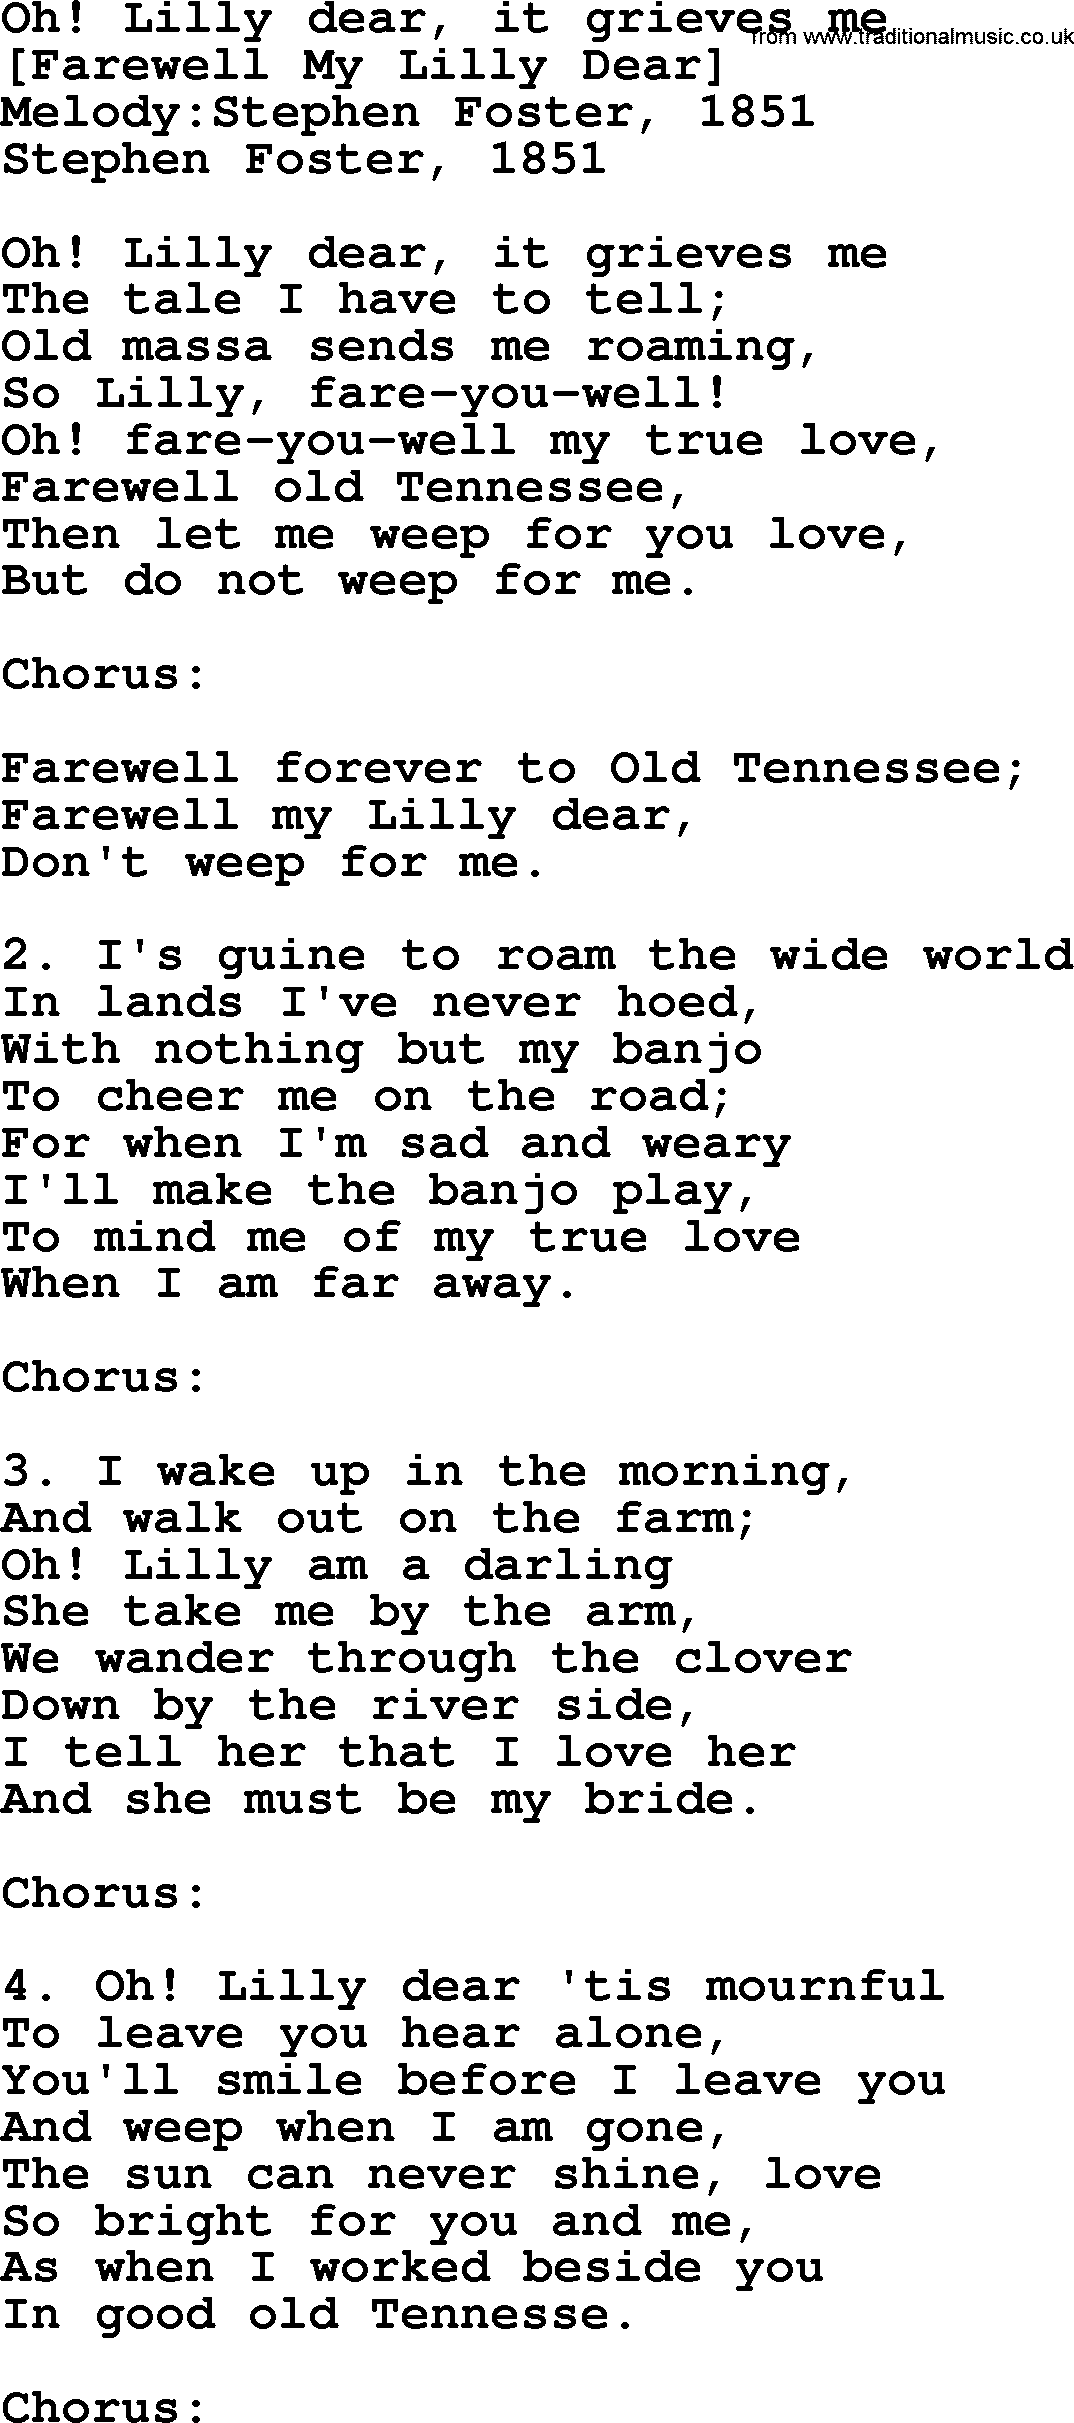 Old American Song: Oh! Lilly Dear, It Grieves Me, lyrics